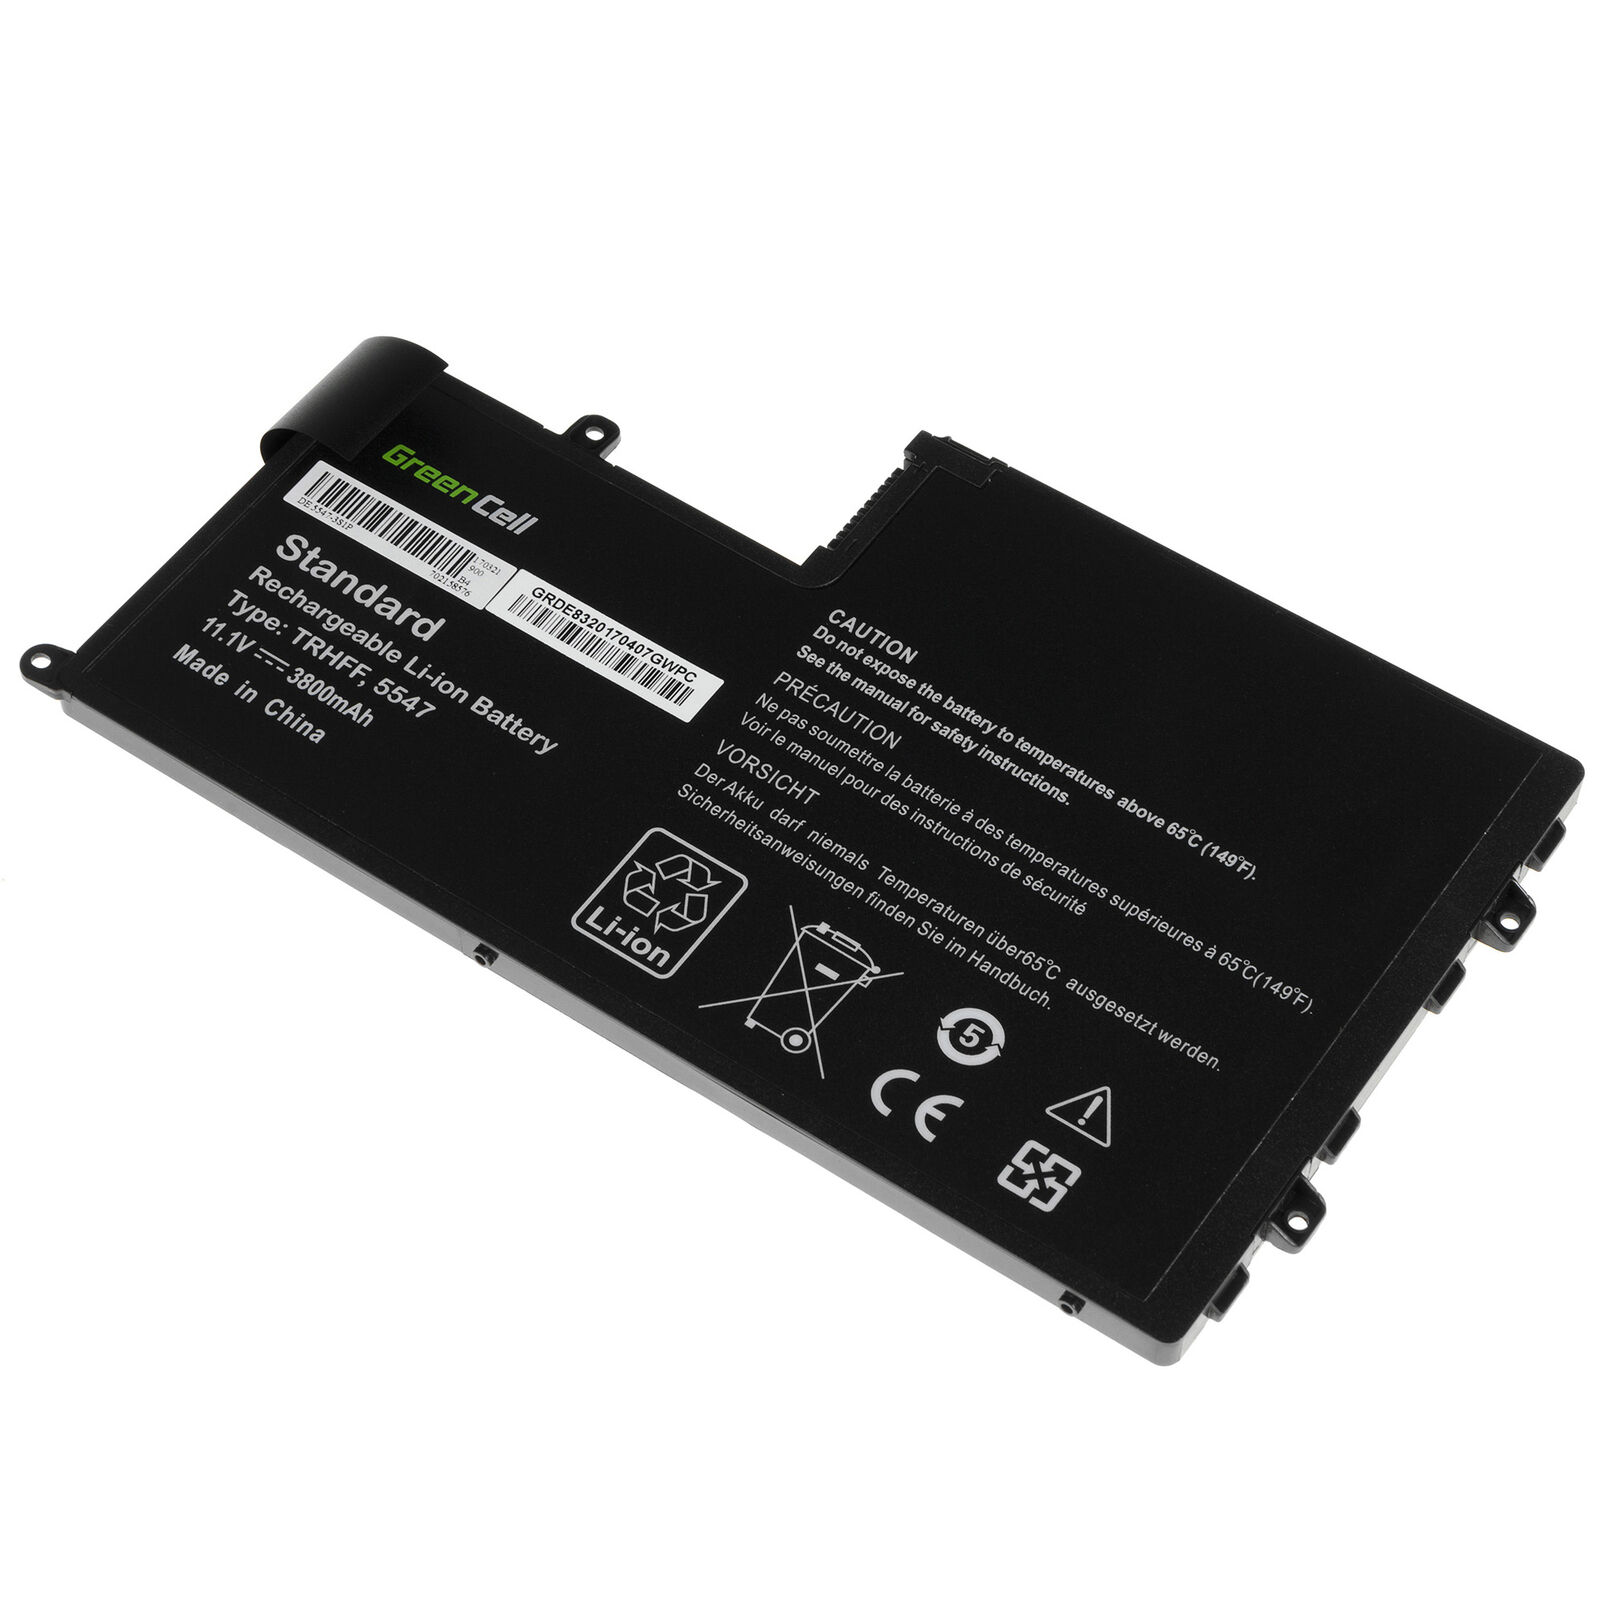 Accu voor Dell Inspiron 15 5445 5447 5547 5547 Latitude 3450 3550 trhff (compatible)